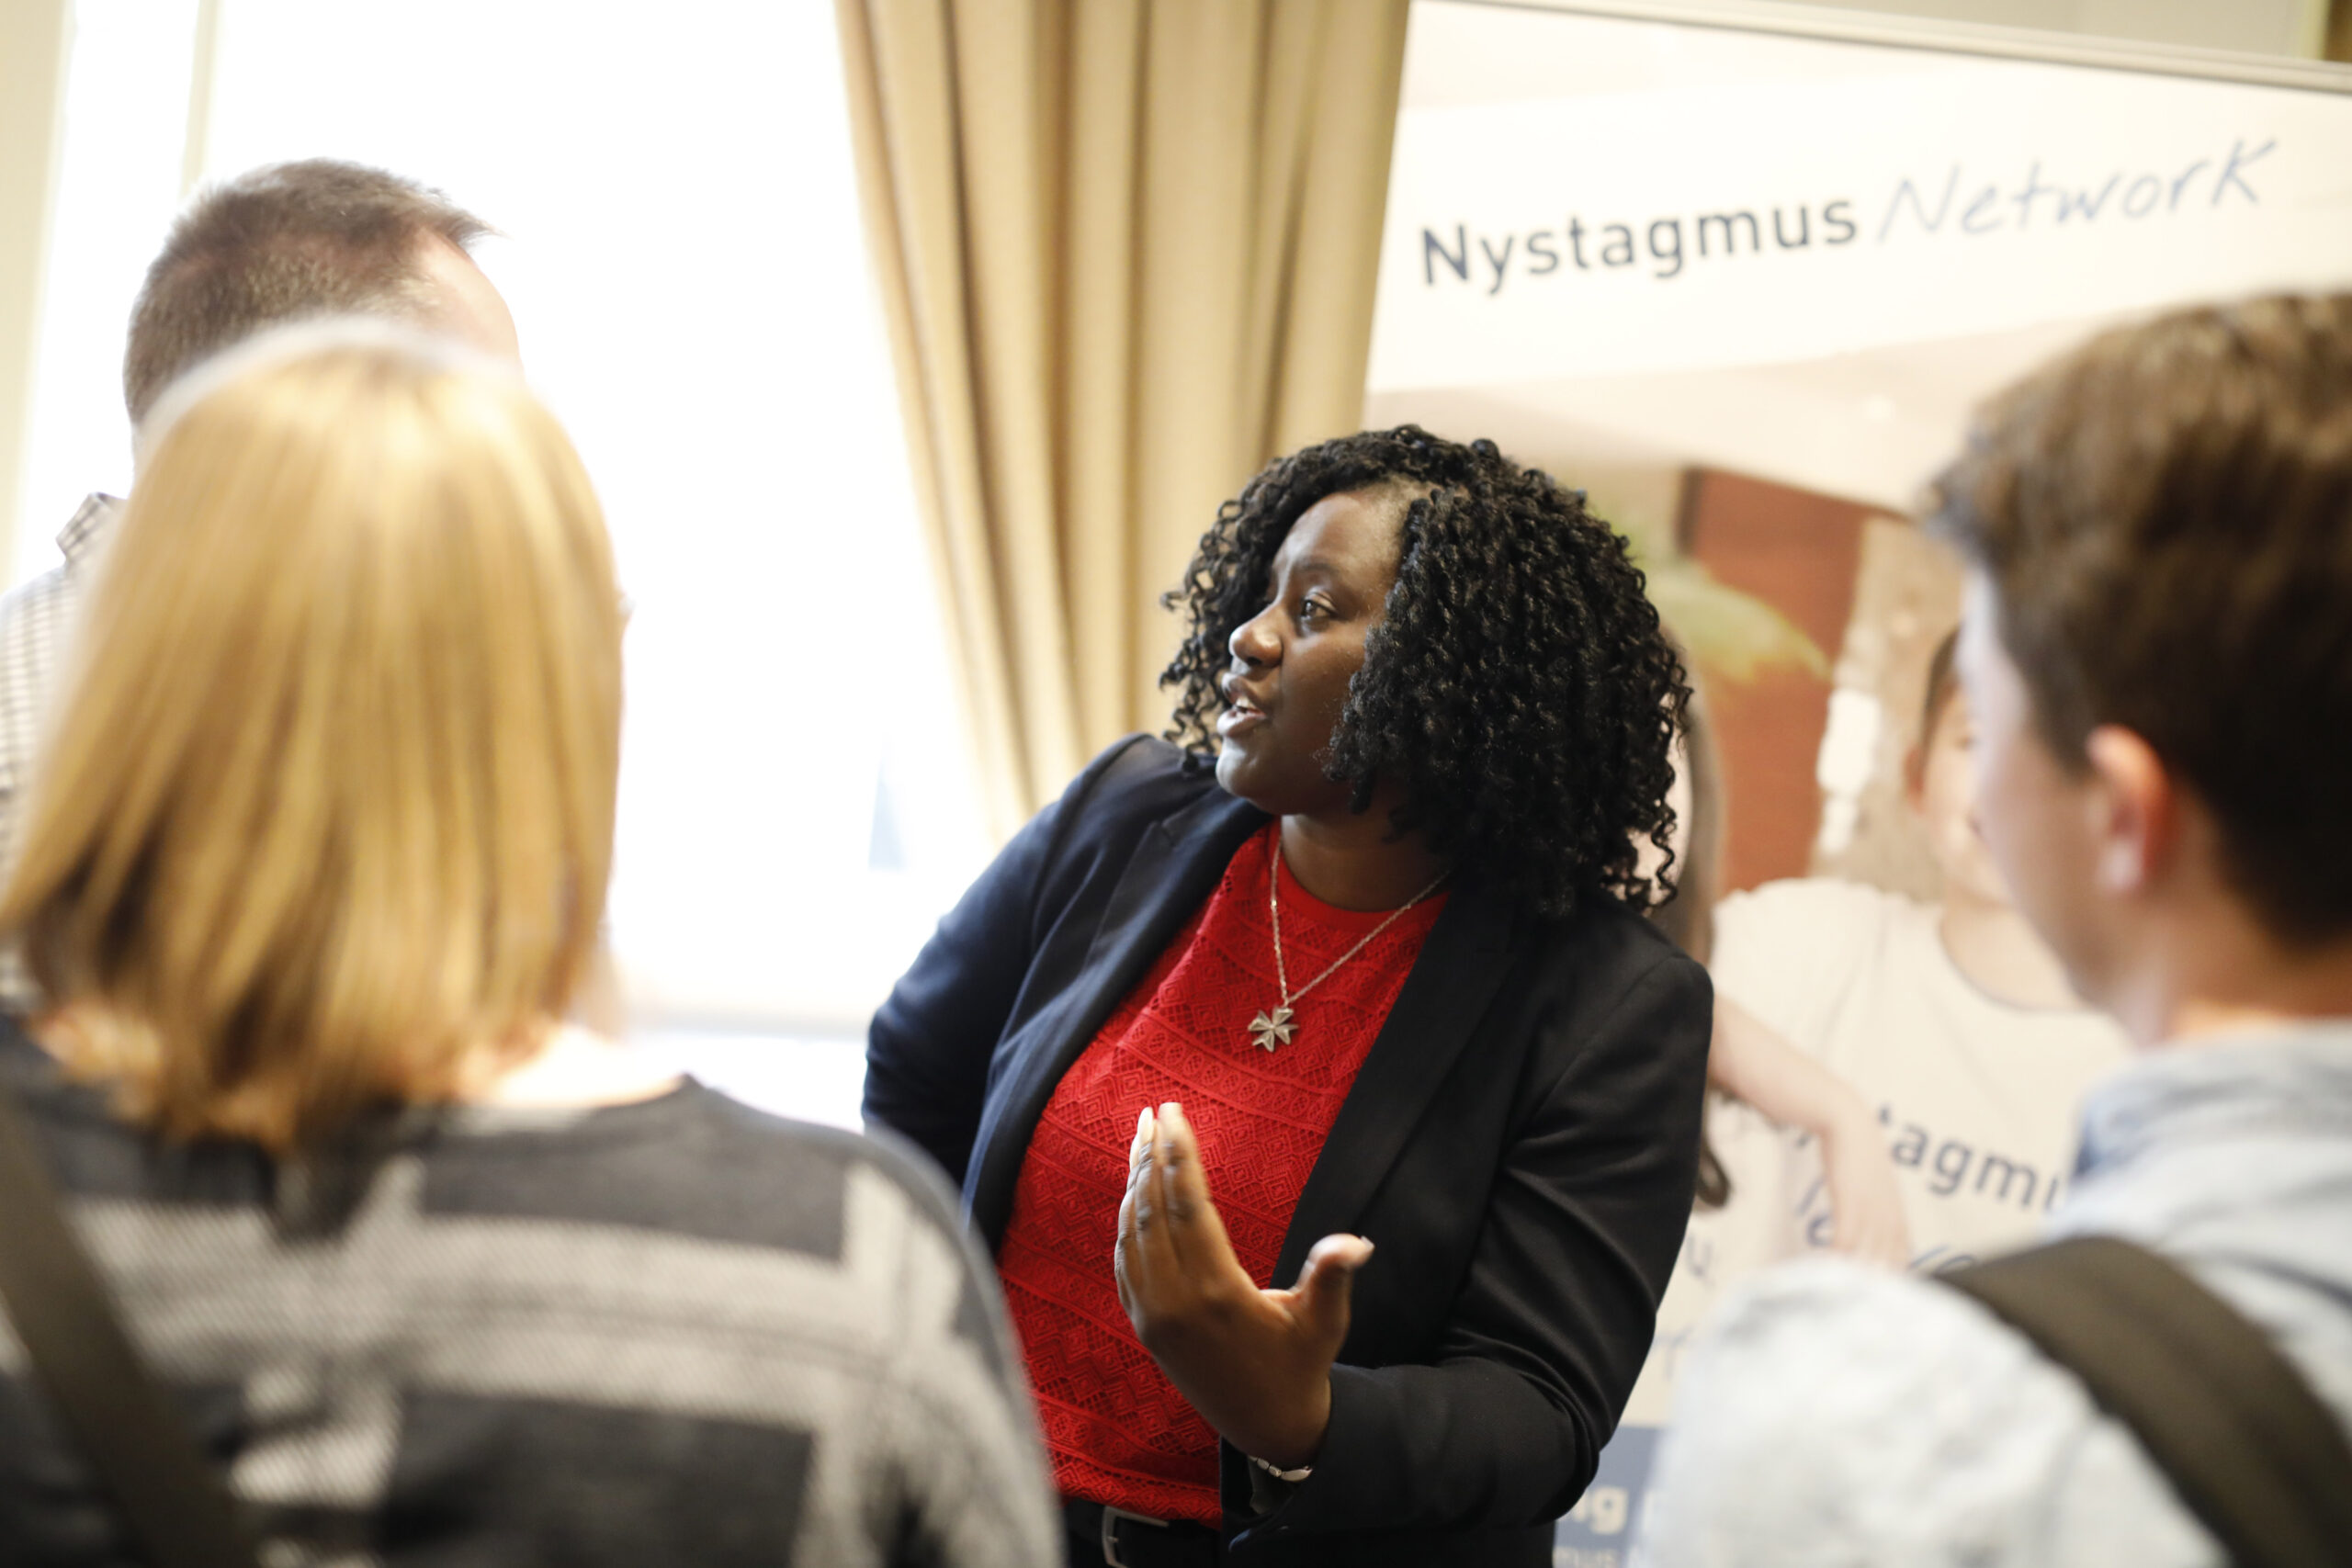 Nystagmus Networking